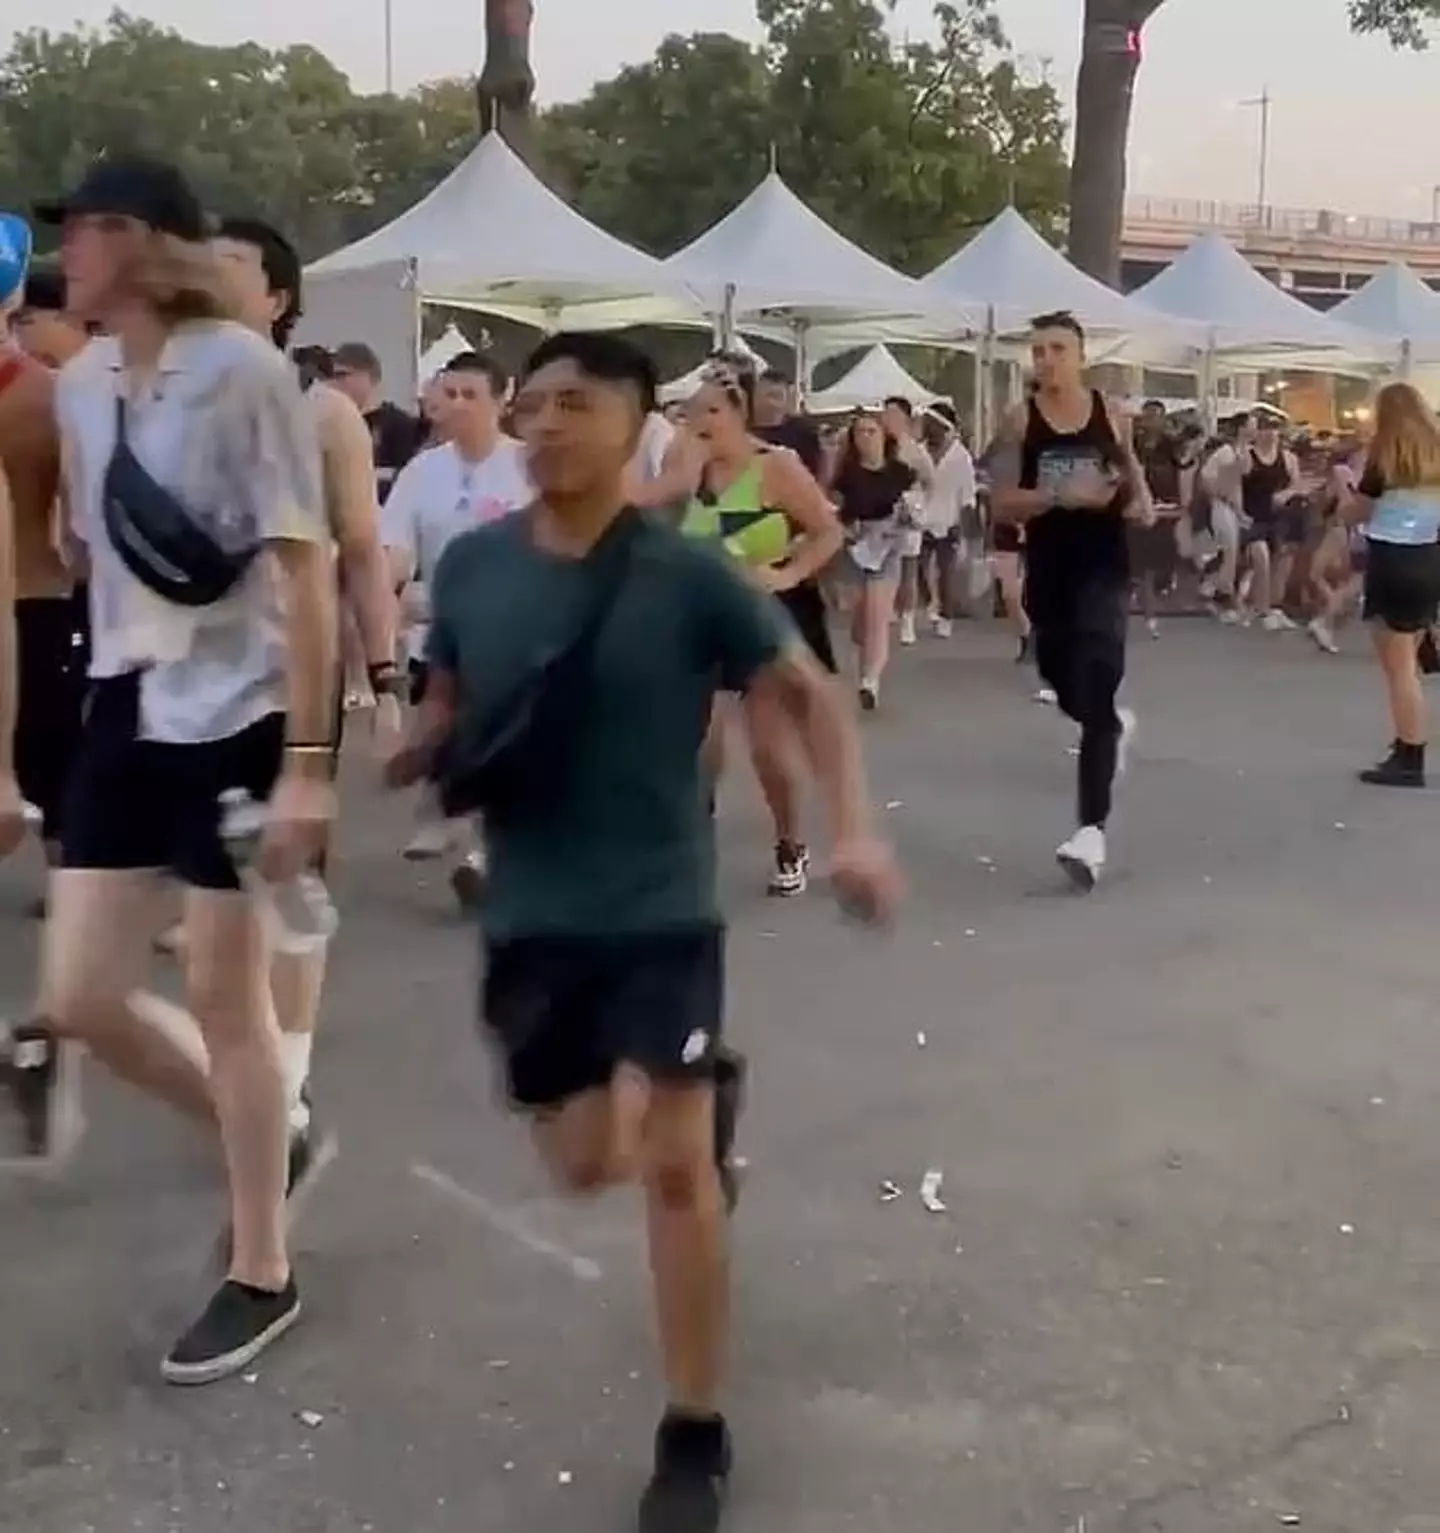 A number of videos on social media show the incredible scenes of hundreds of concertgoers storming through the security checkpoint, all the way into the venue on Randall's Island.